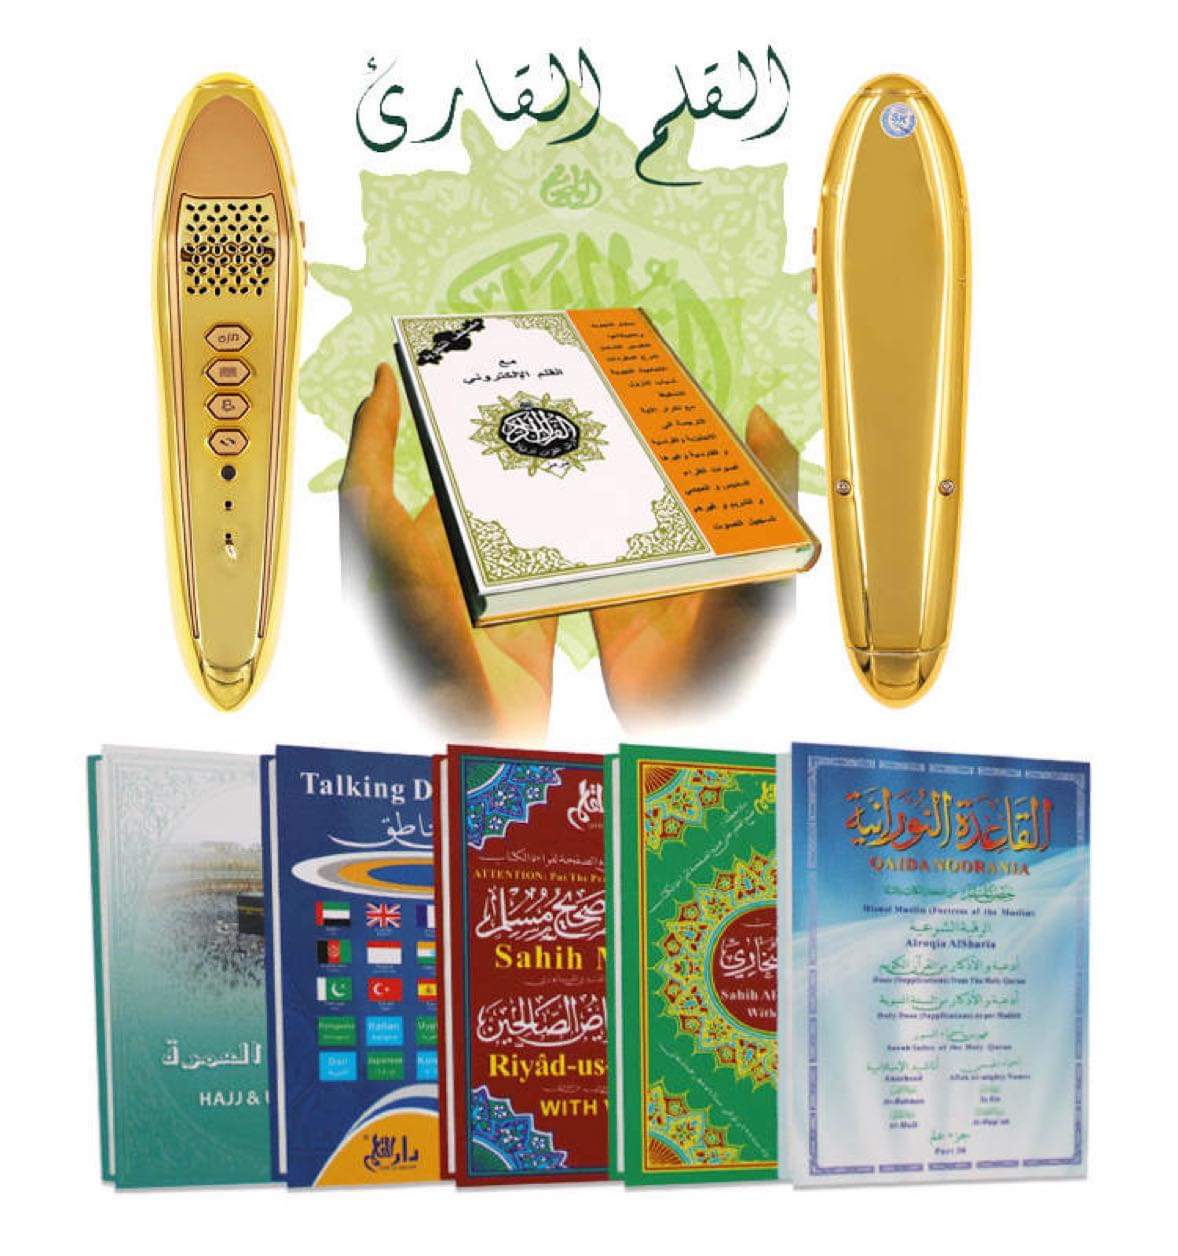 Quran reading pen, Quran box, Learn Quran write and read using Quran Reading pen. Middle Eastern Boutique